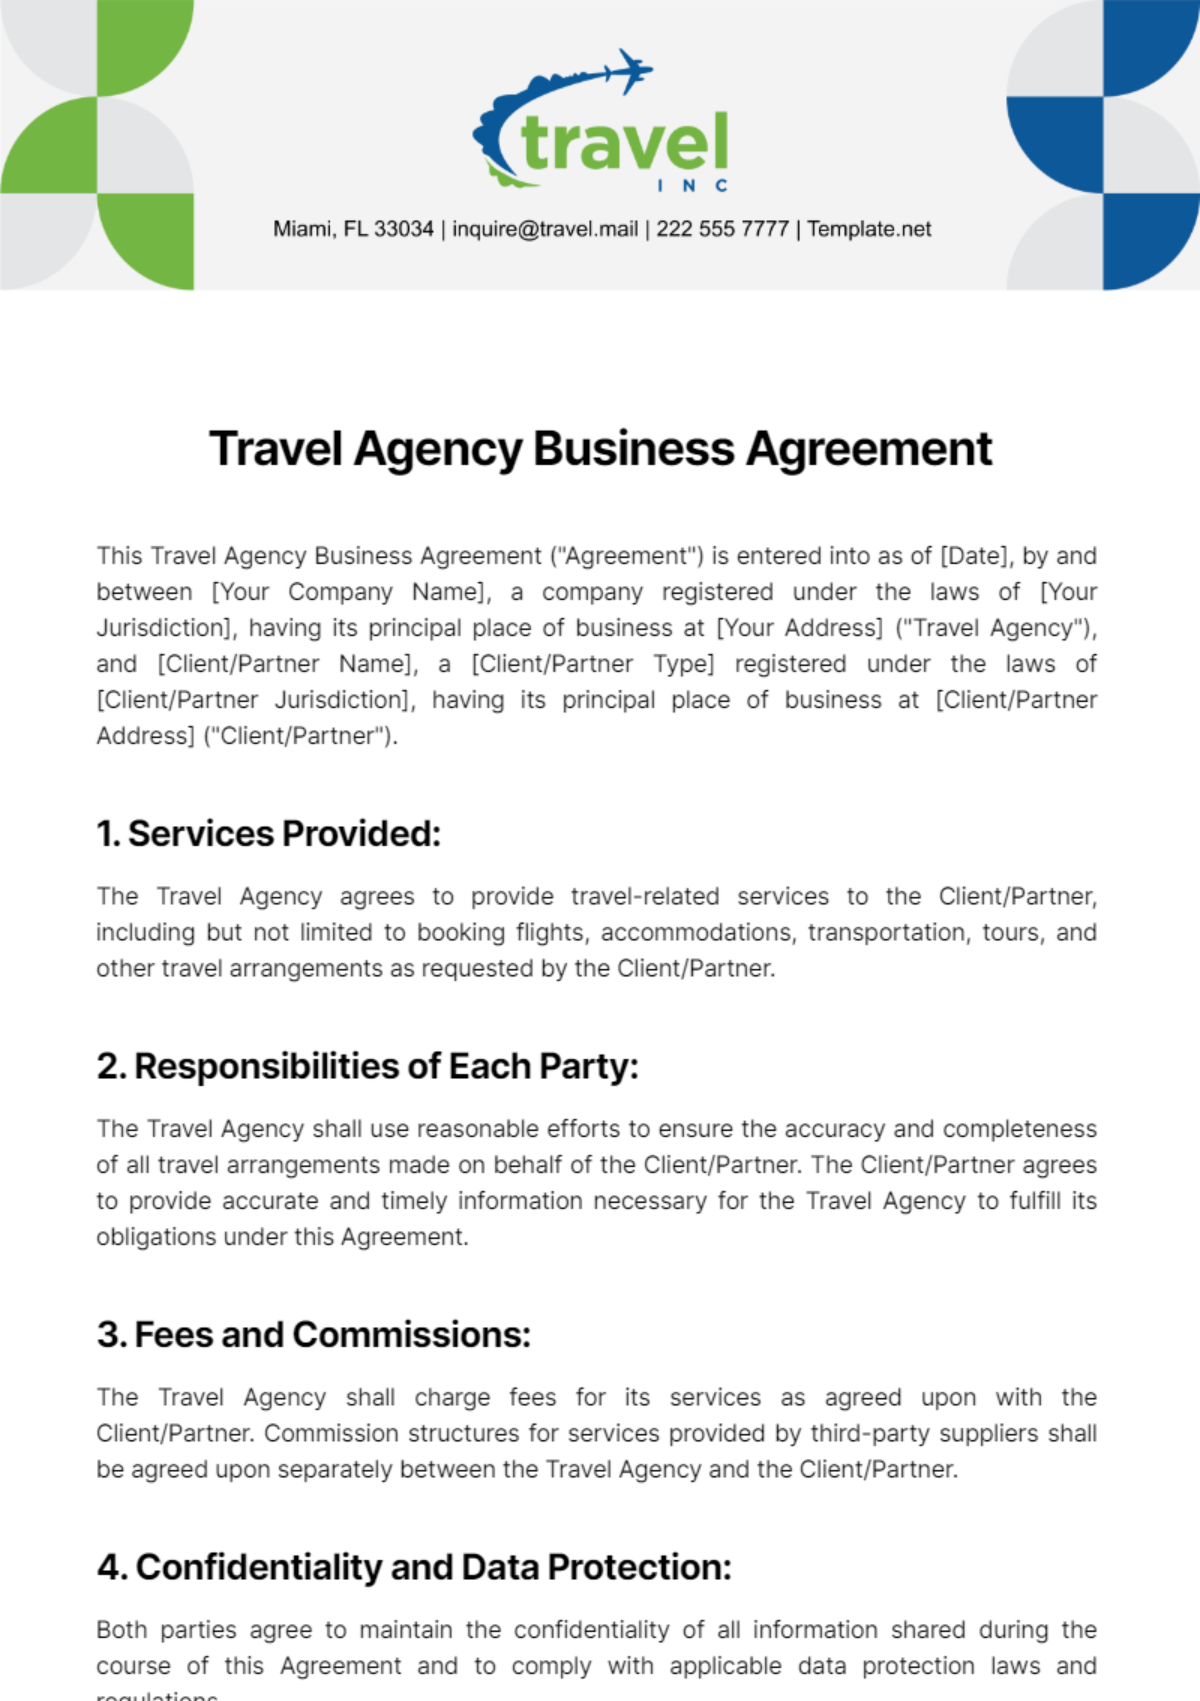 Travel Agency Business Agreement Template